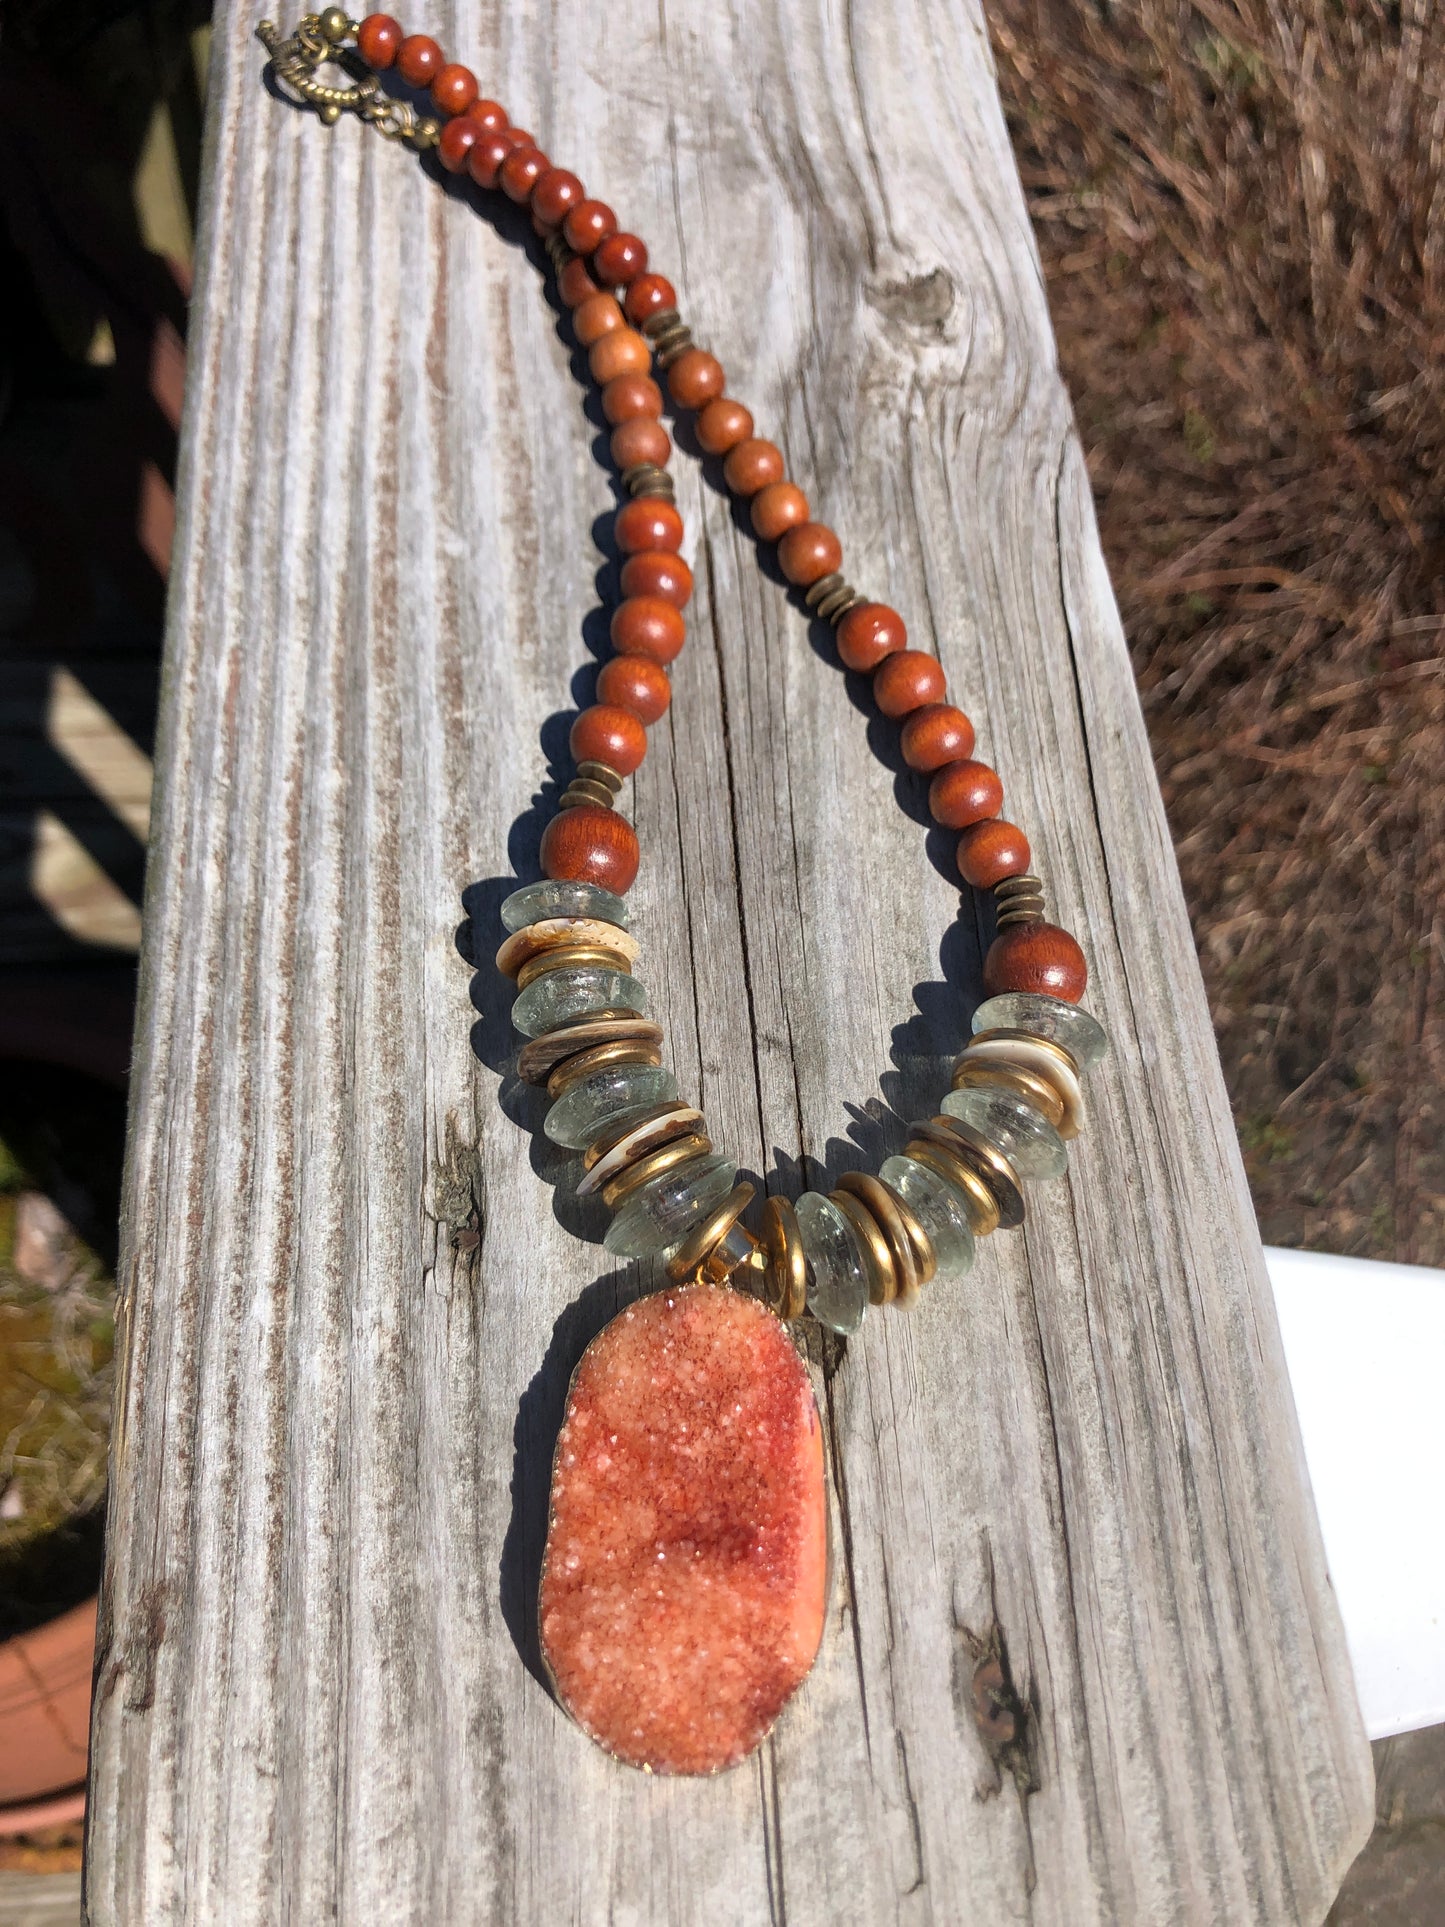 Rustic Orange Druzy and Wood Bead Necklace, 18 inches add 2 inch Stone pendant